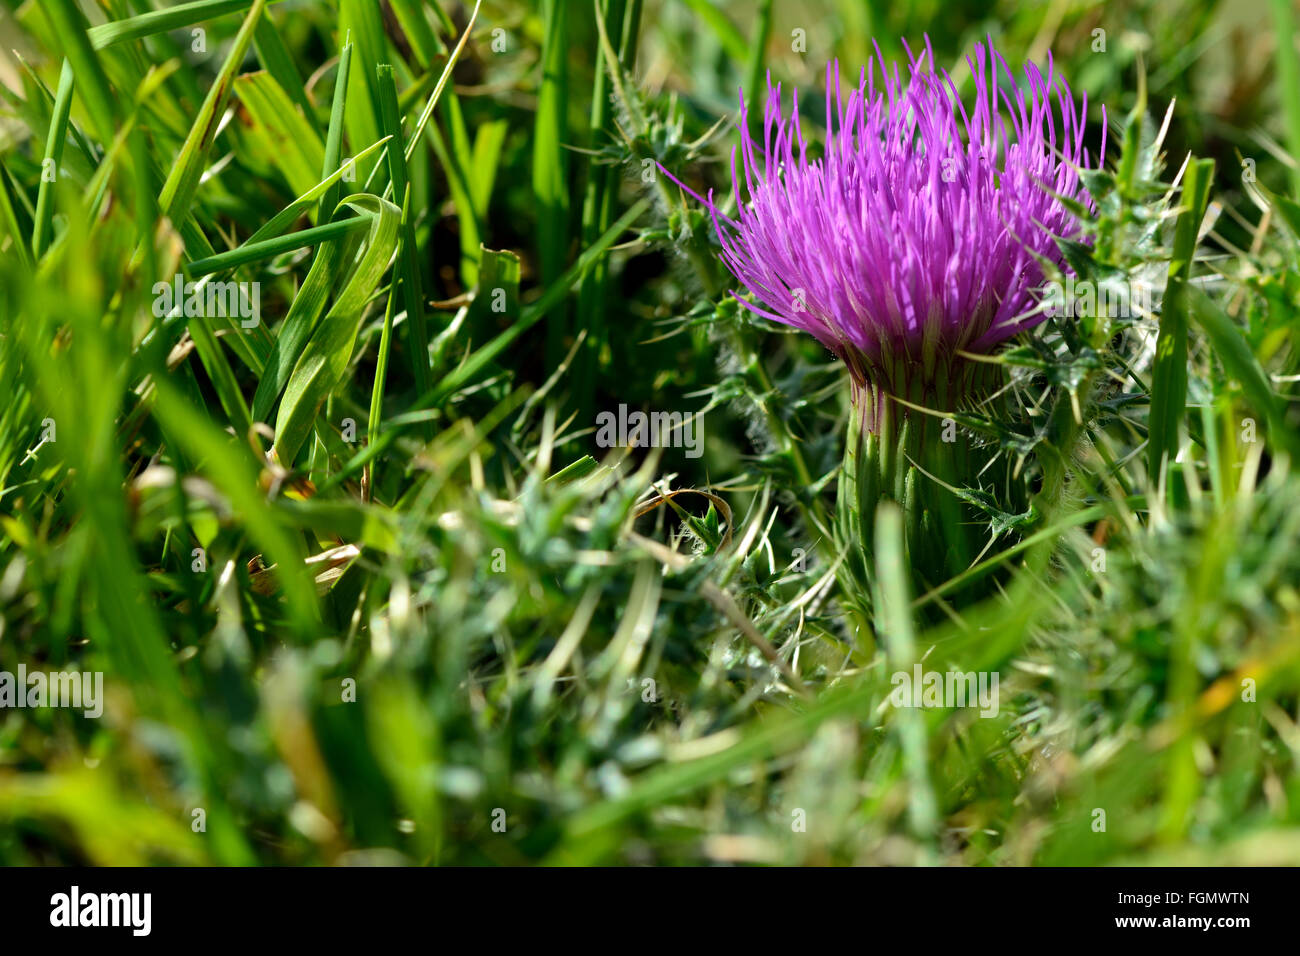 Dwarf thistle (Cirsium acaulon). A low growing prickly plant in the daisy family (Asteraceae) in flower amongst grass Stock Photo